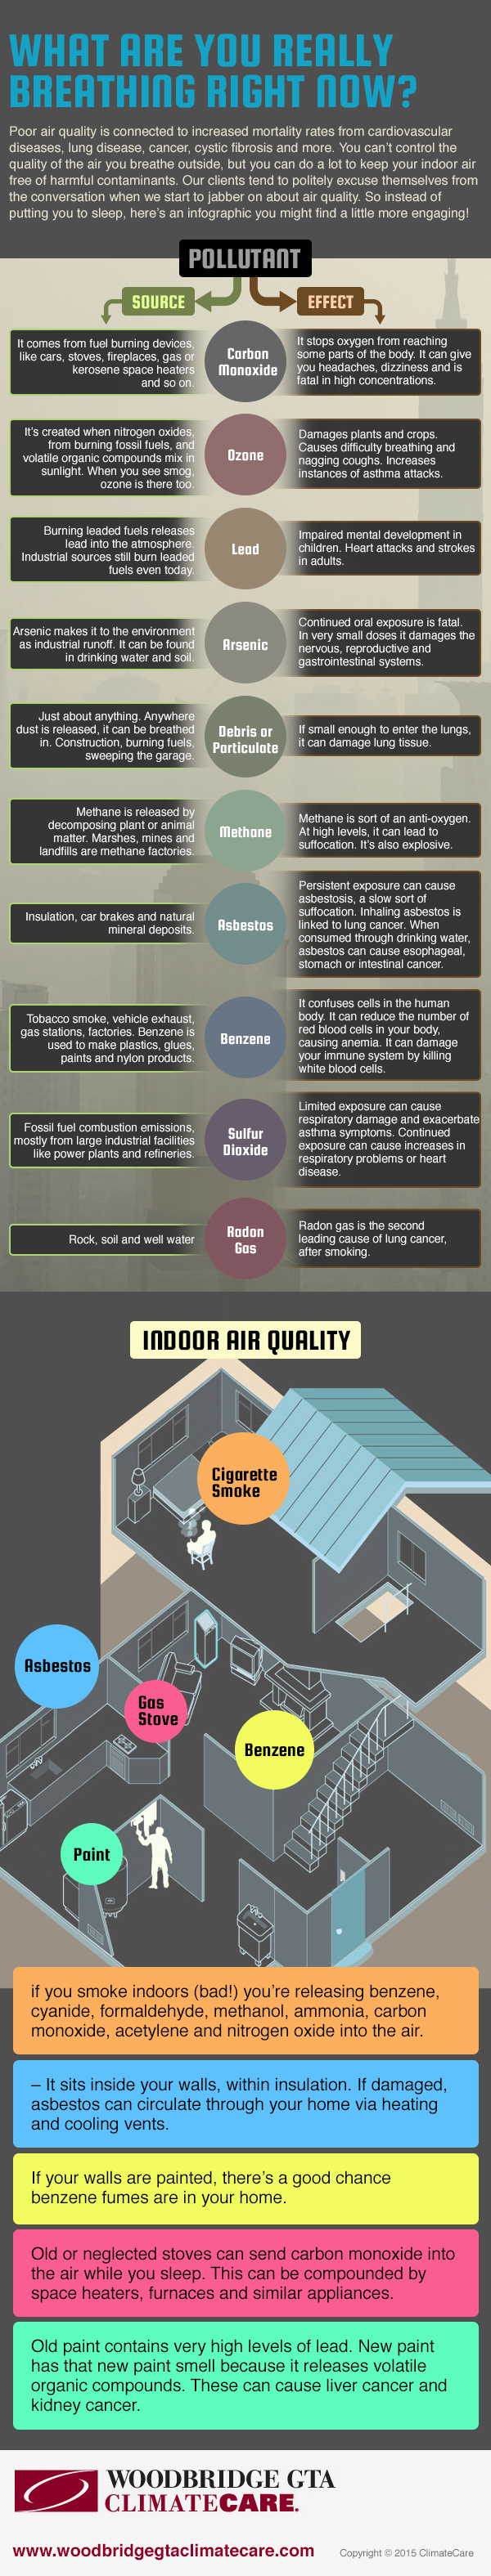 Indoor air quality - what are you breathing in?